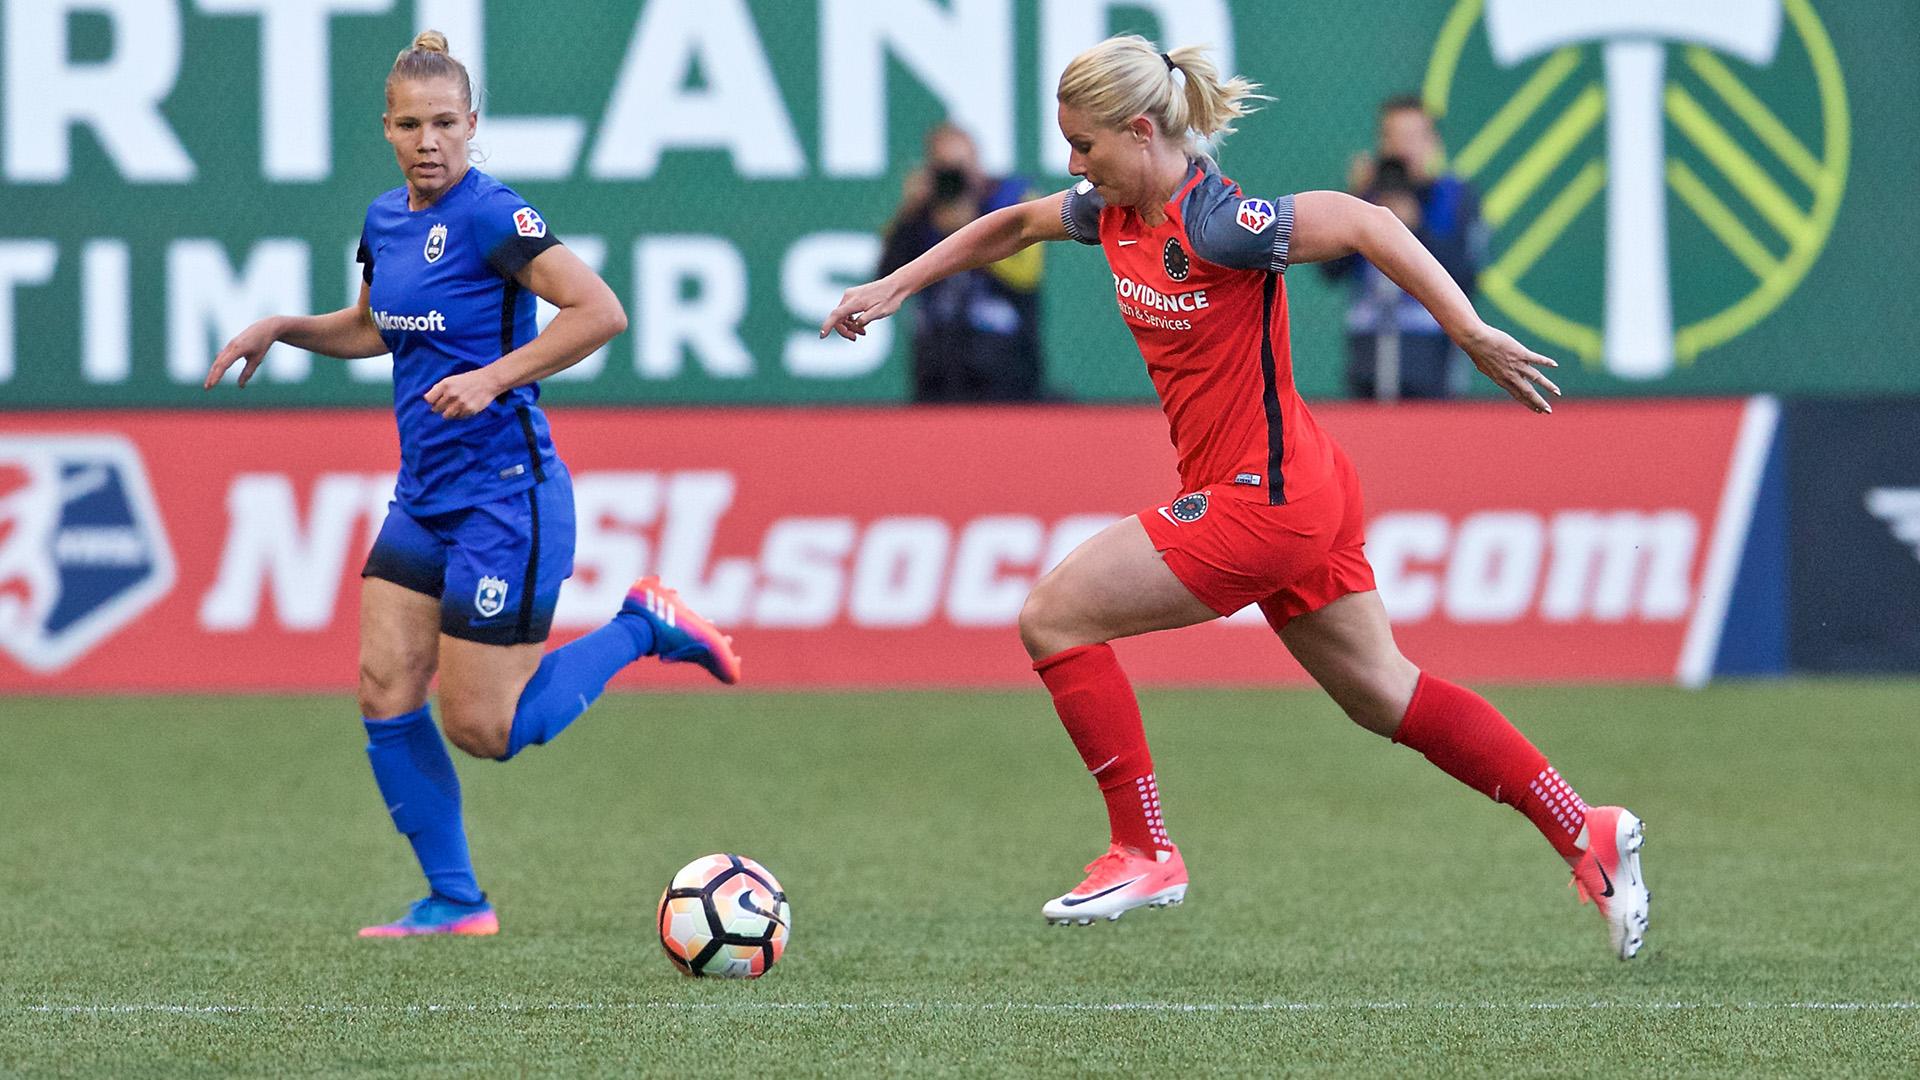 Amandine Henry named to France's Euro 2017 roster